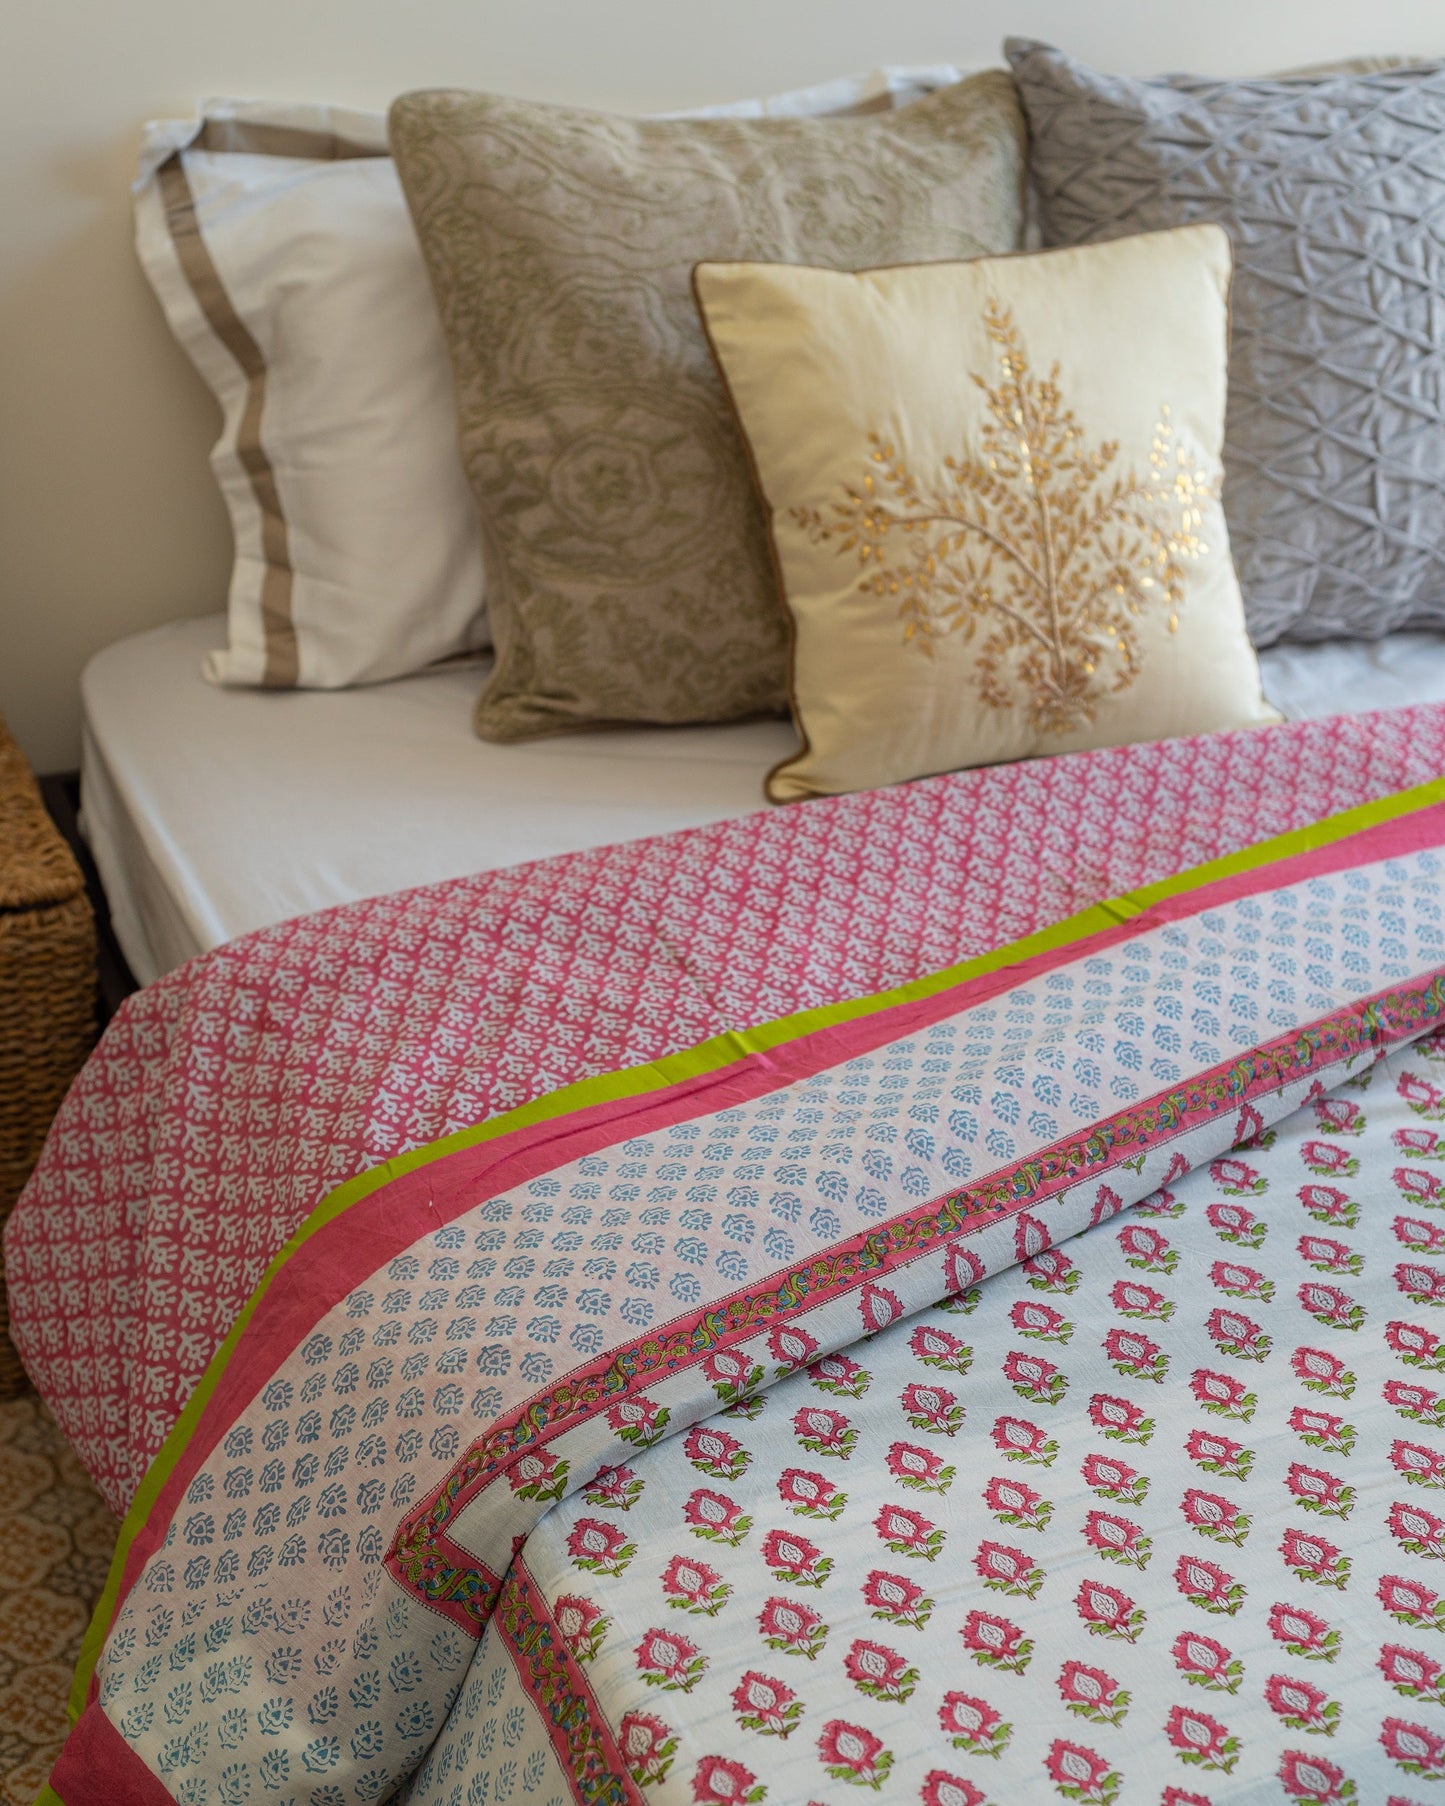 Pink quilt cover - Block print Duvet cover - Quilt cover - Razai cover - Queen & Twin